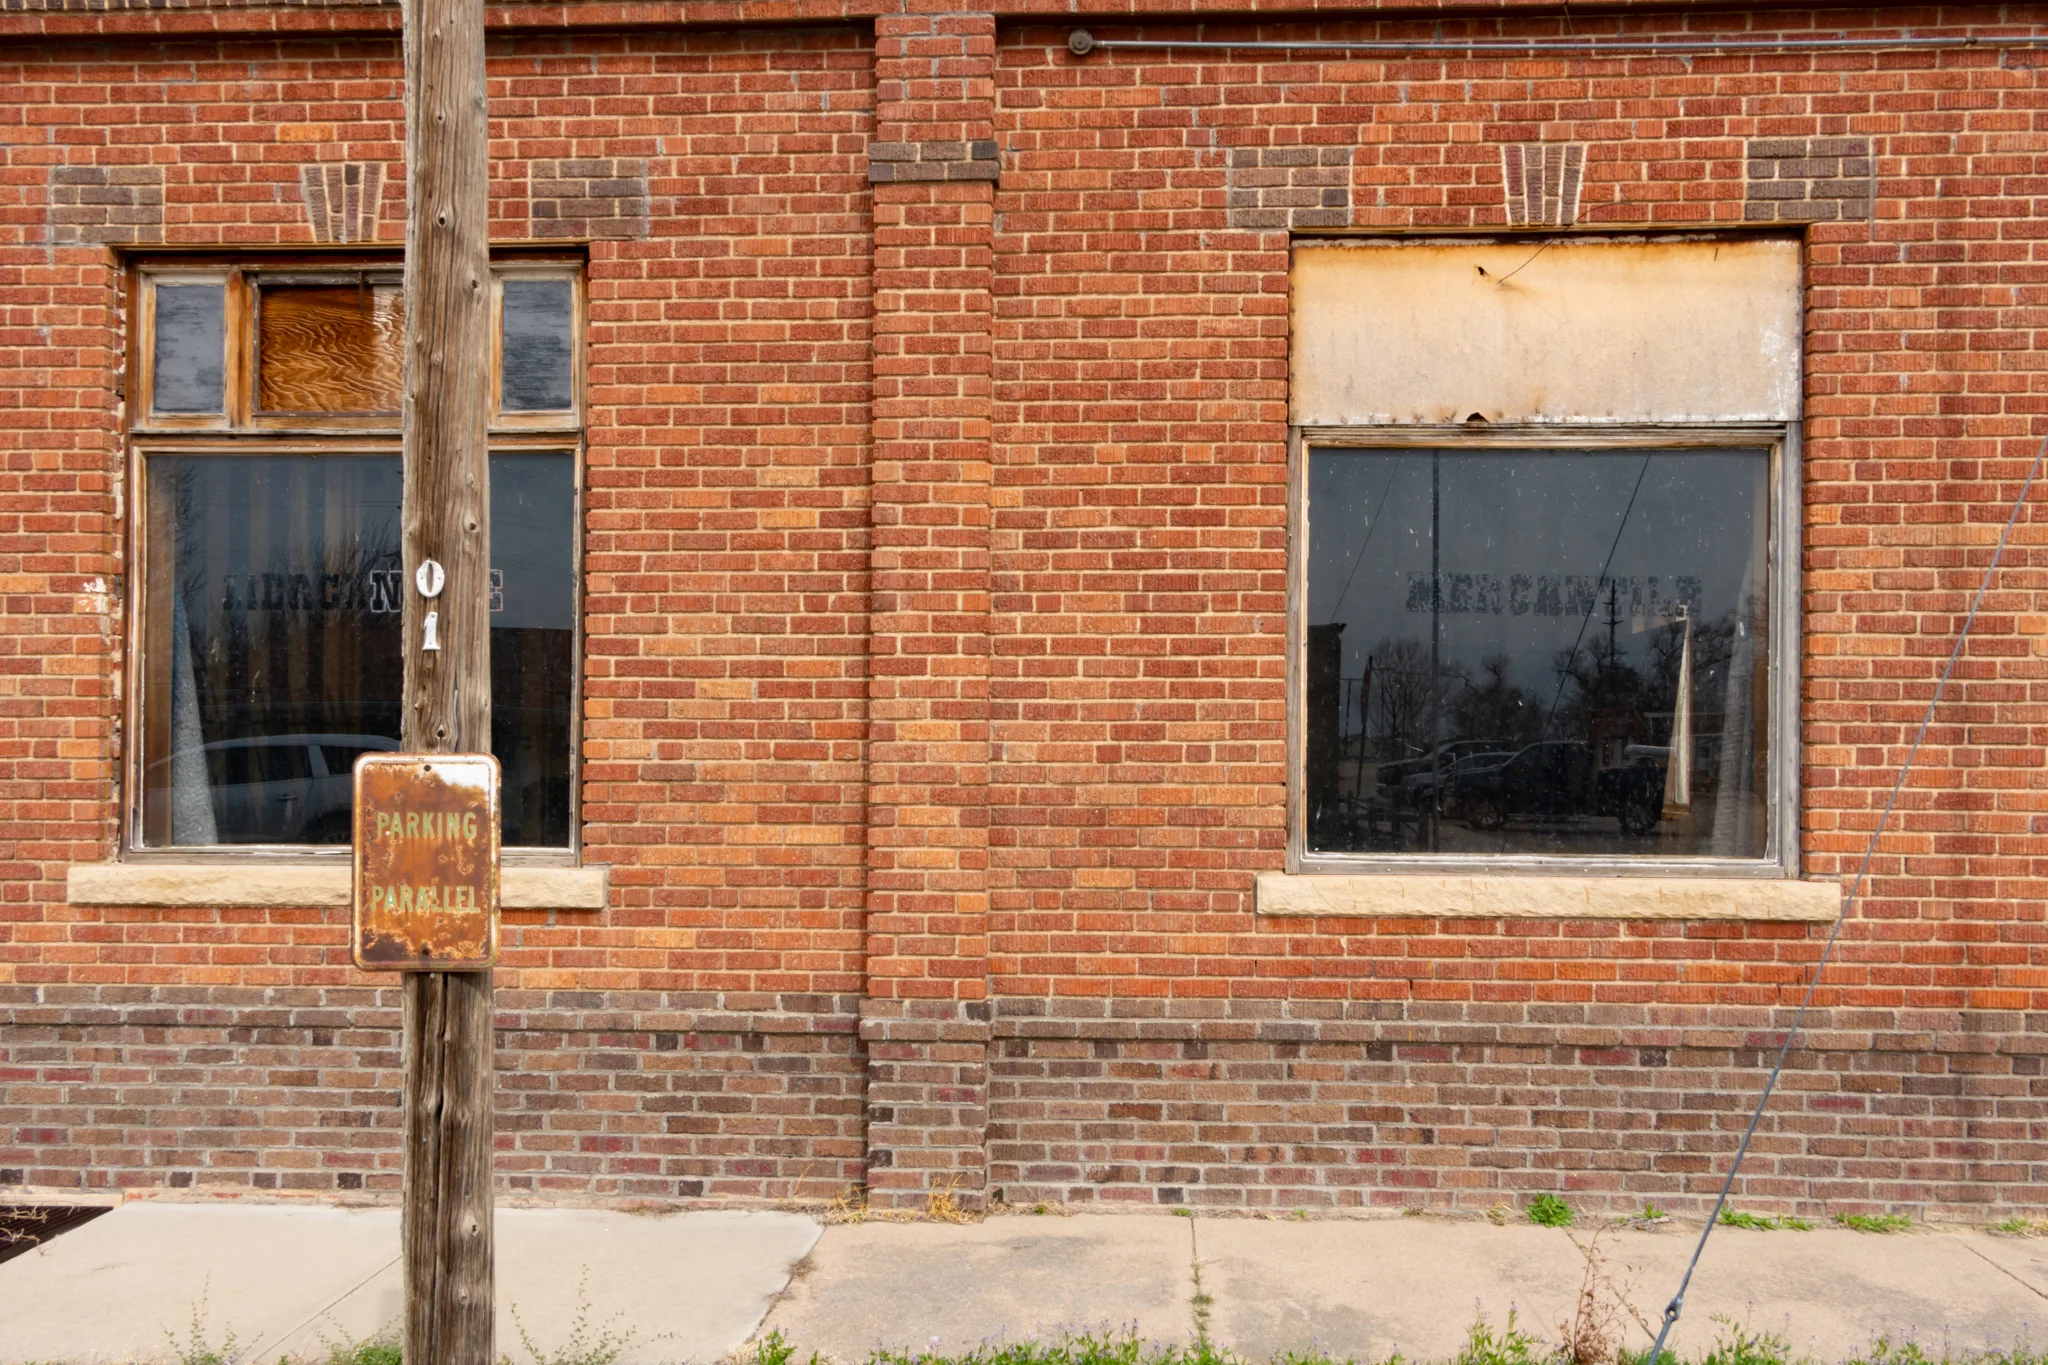 Close up of an abandoned Merchantile building in Hillrose, Colorado. In the window you can see a reflection of cars parked in the business district.